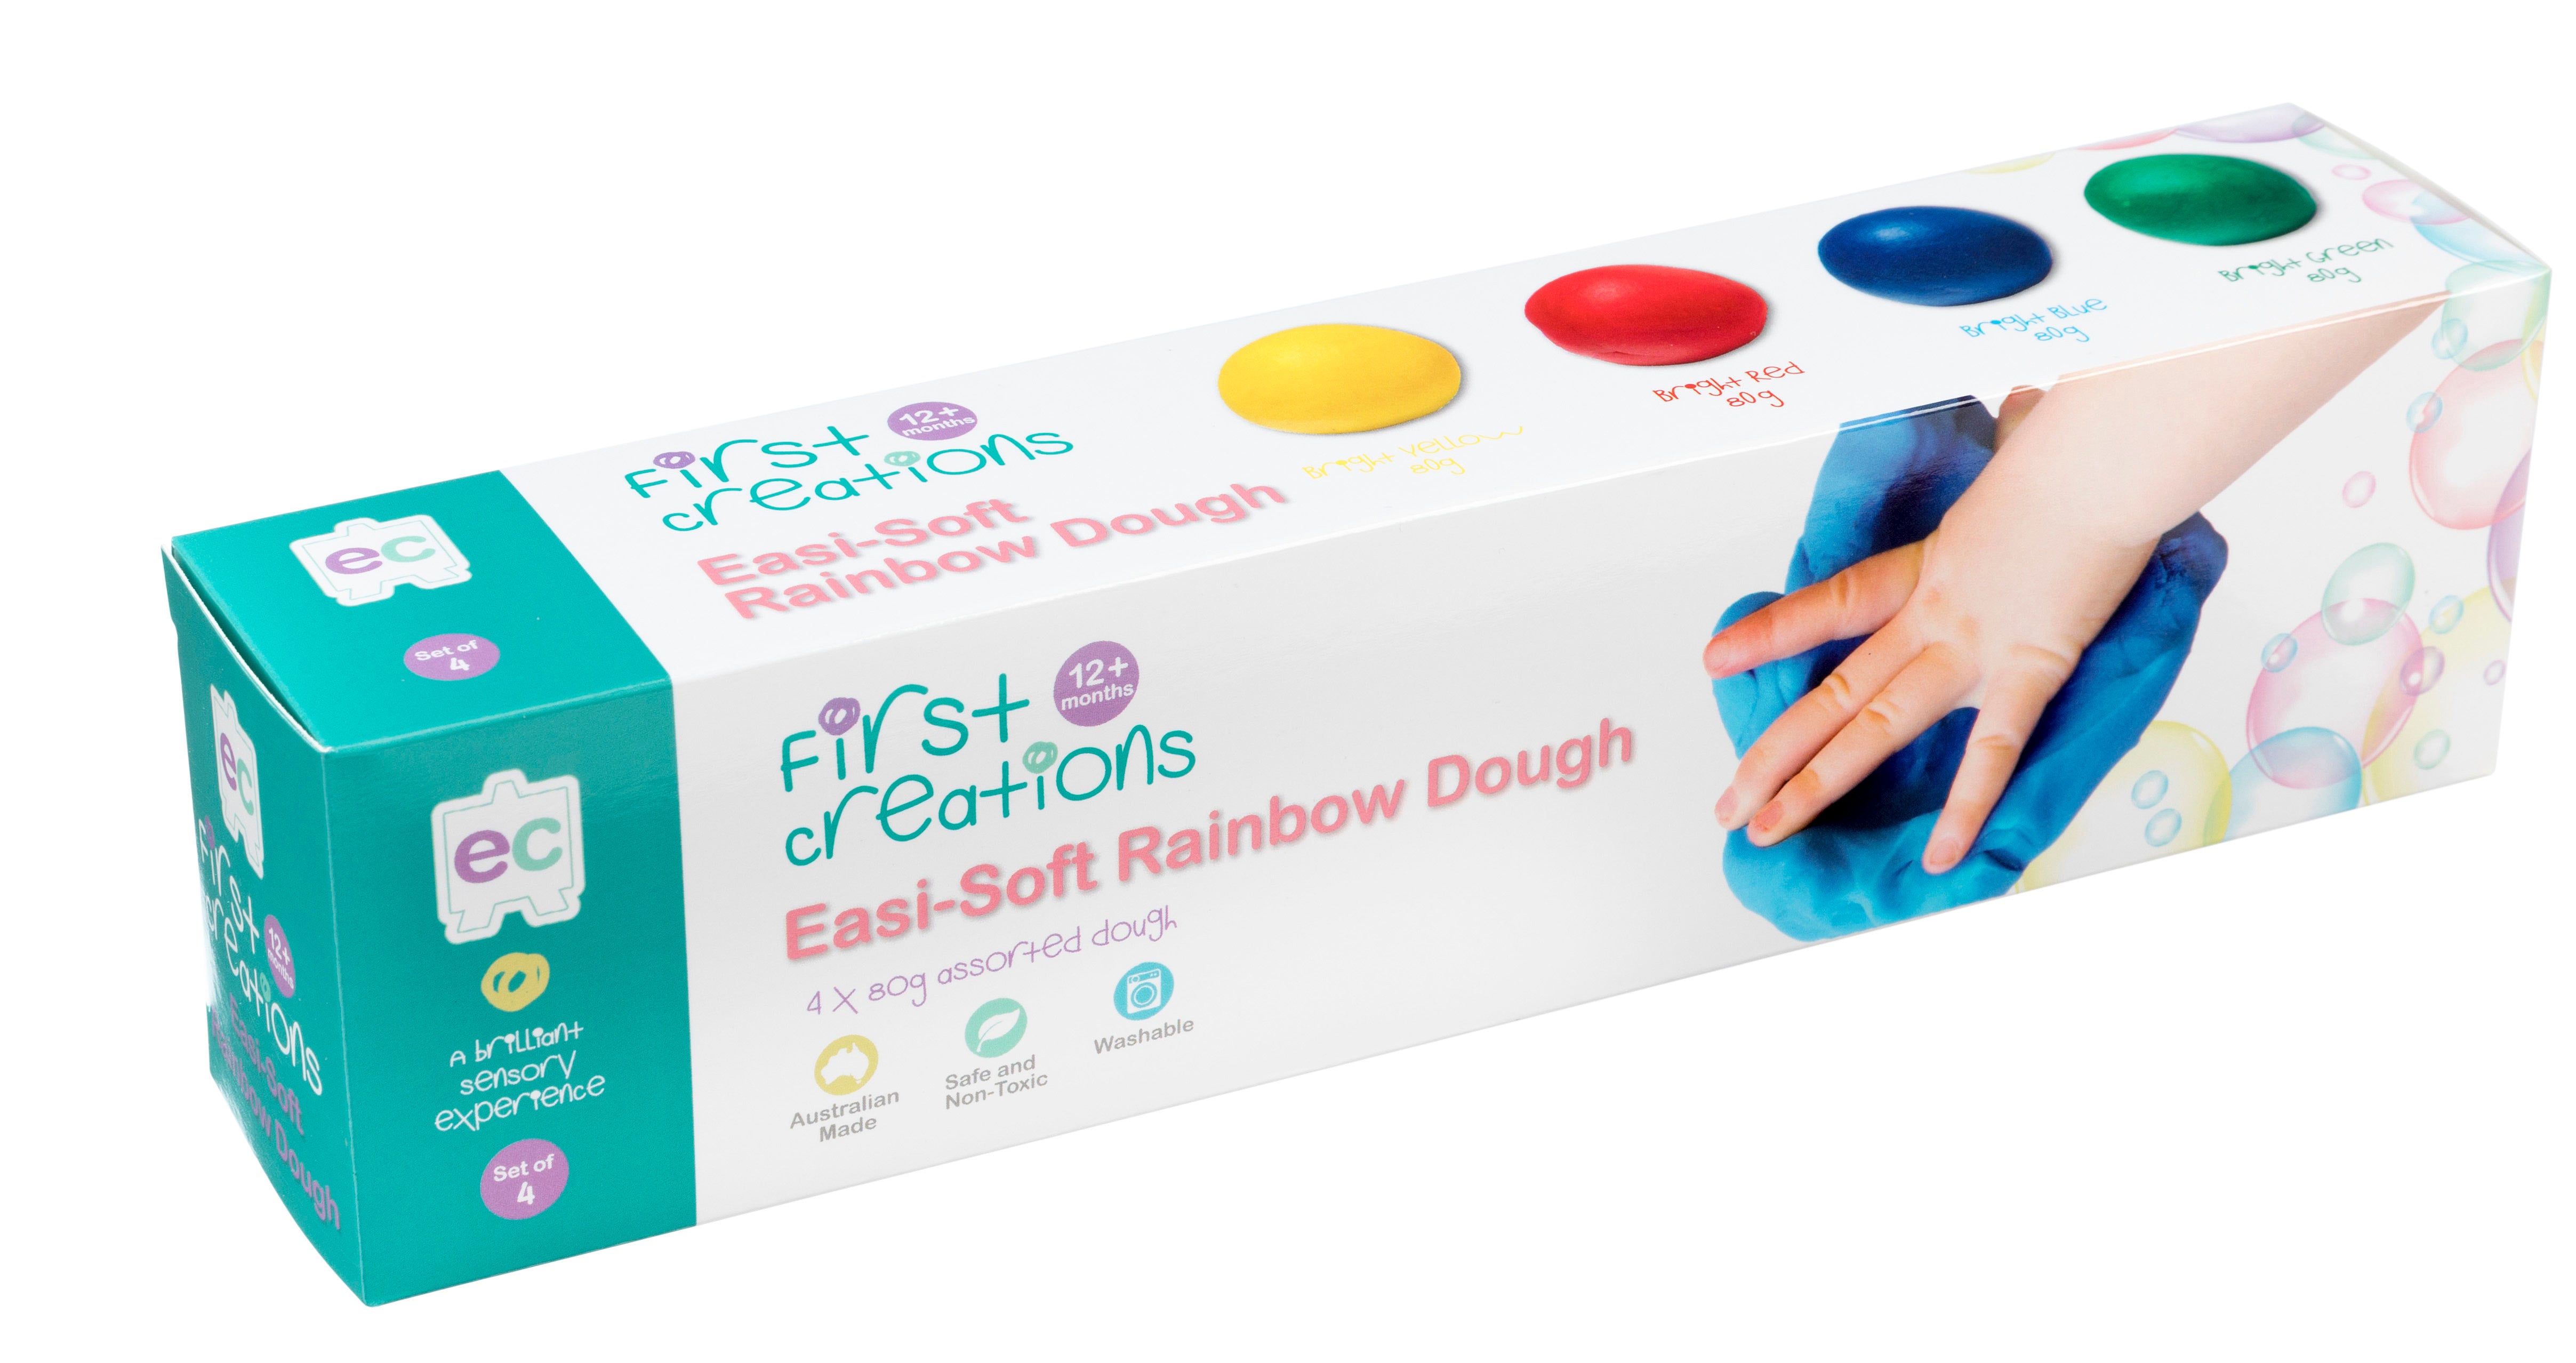  First Creations Easi-Soft Modelling Dough Rainbow 4 Pack This First Creations Easi-Soft Modelling Dough is perfect for early learners who are developing their fine motor skills and creativity. The dough is designed to be soft and easily mouldable, plus it comes in a variety of bright colours to brighten up your day.